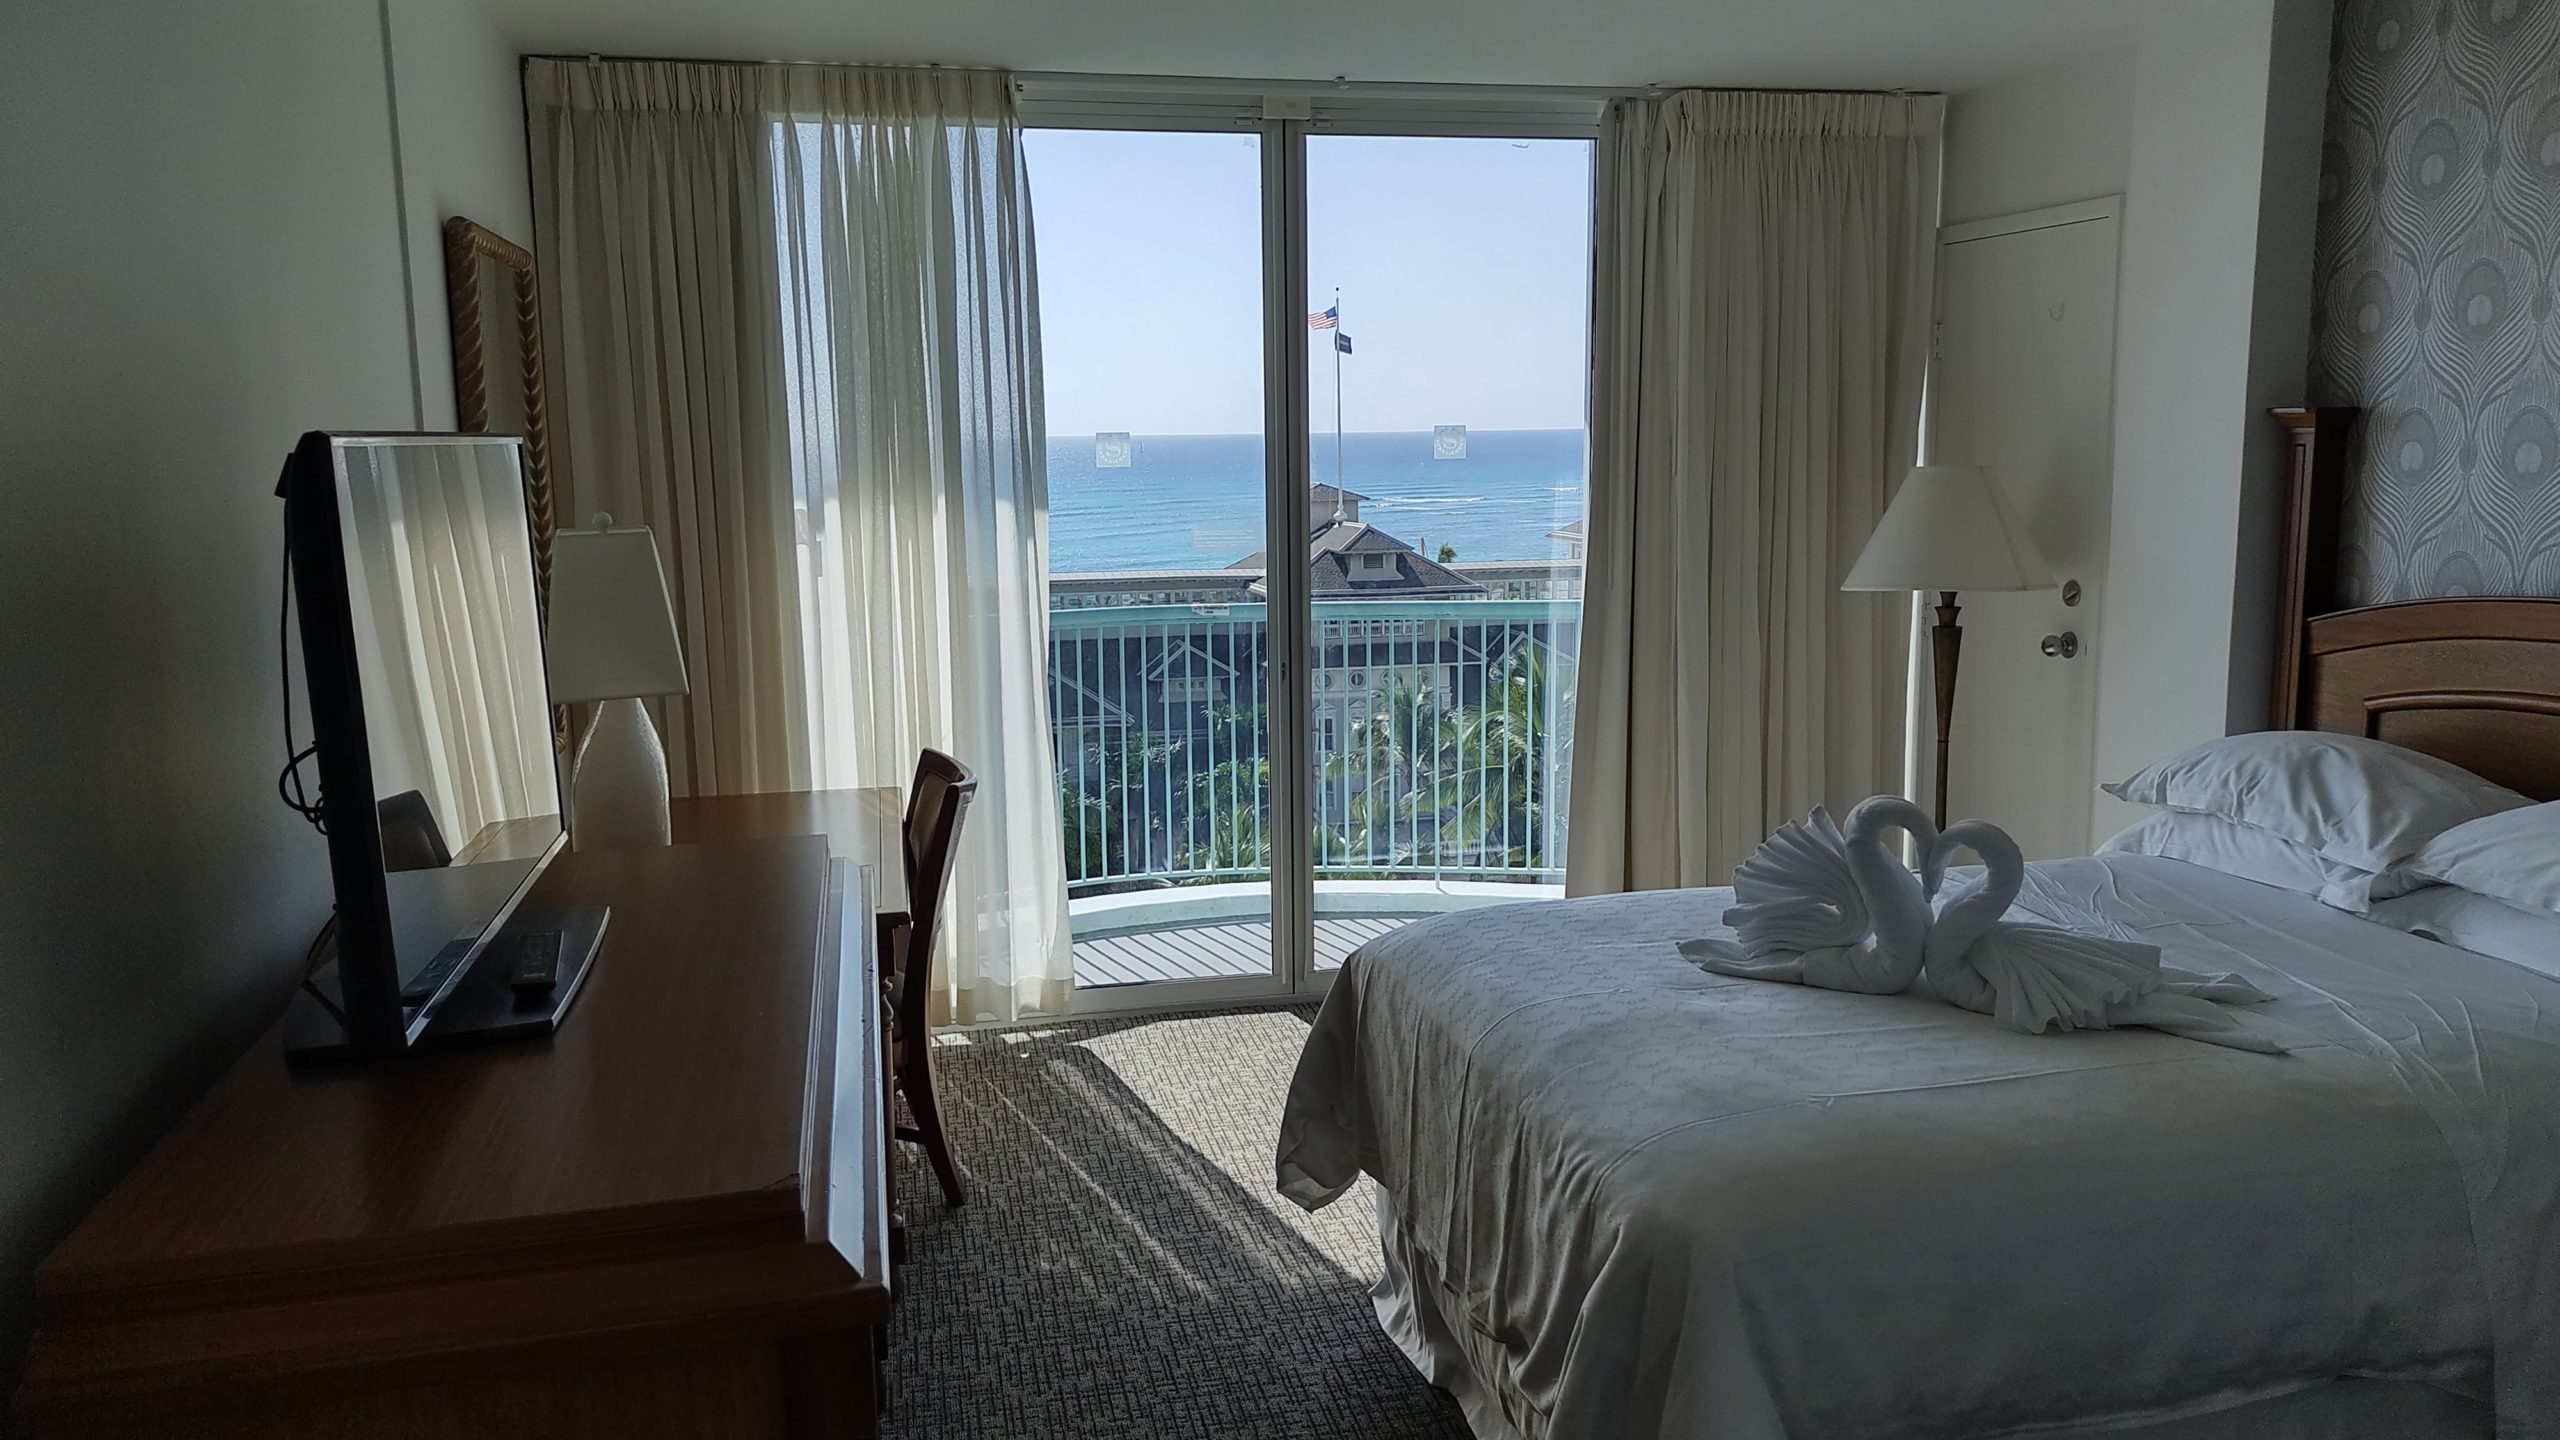 picture of the view form the bedroom lanai.